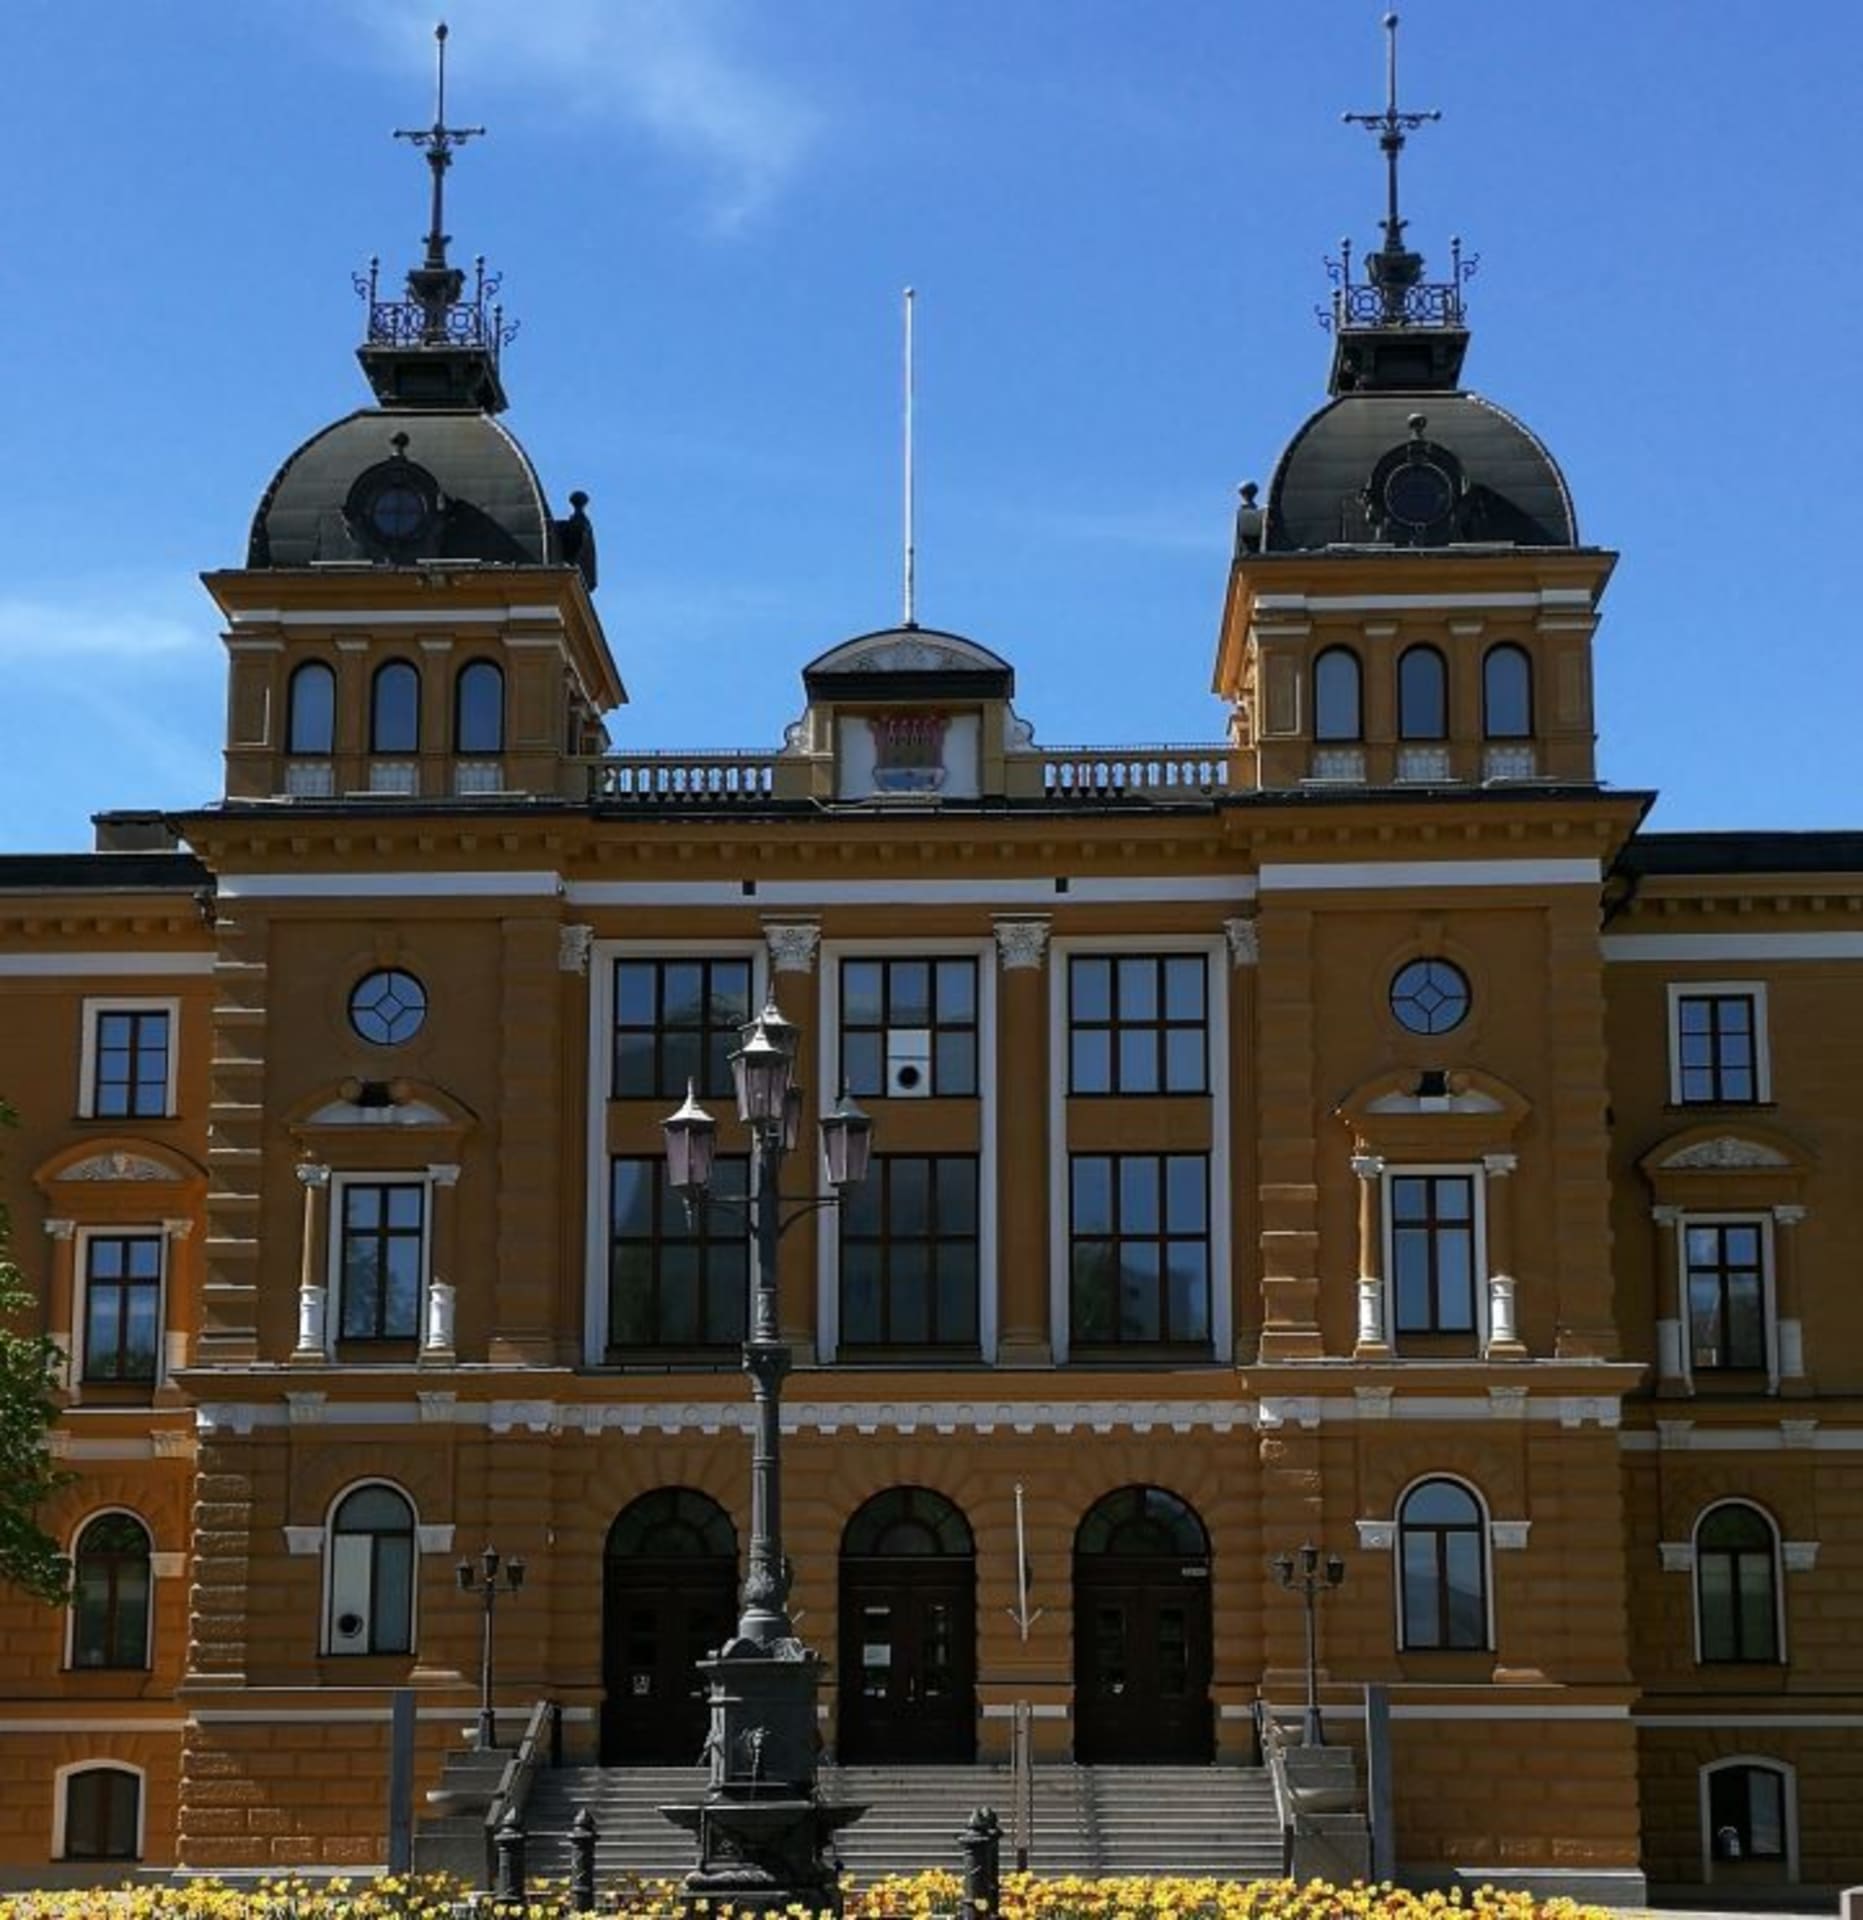 Brownish Oulu city hall with three main doors and two little towers. Background blue sky.